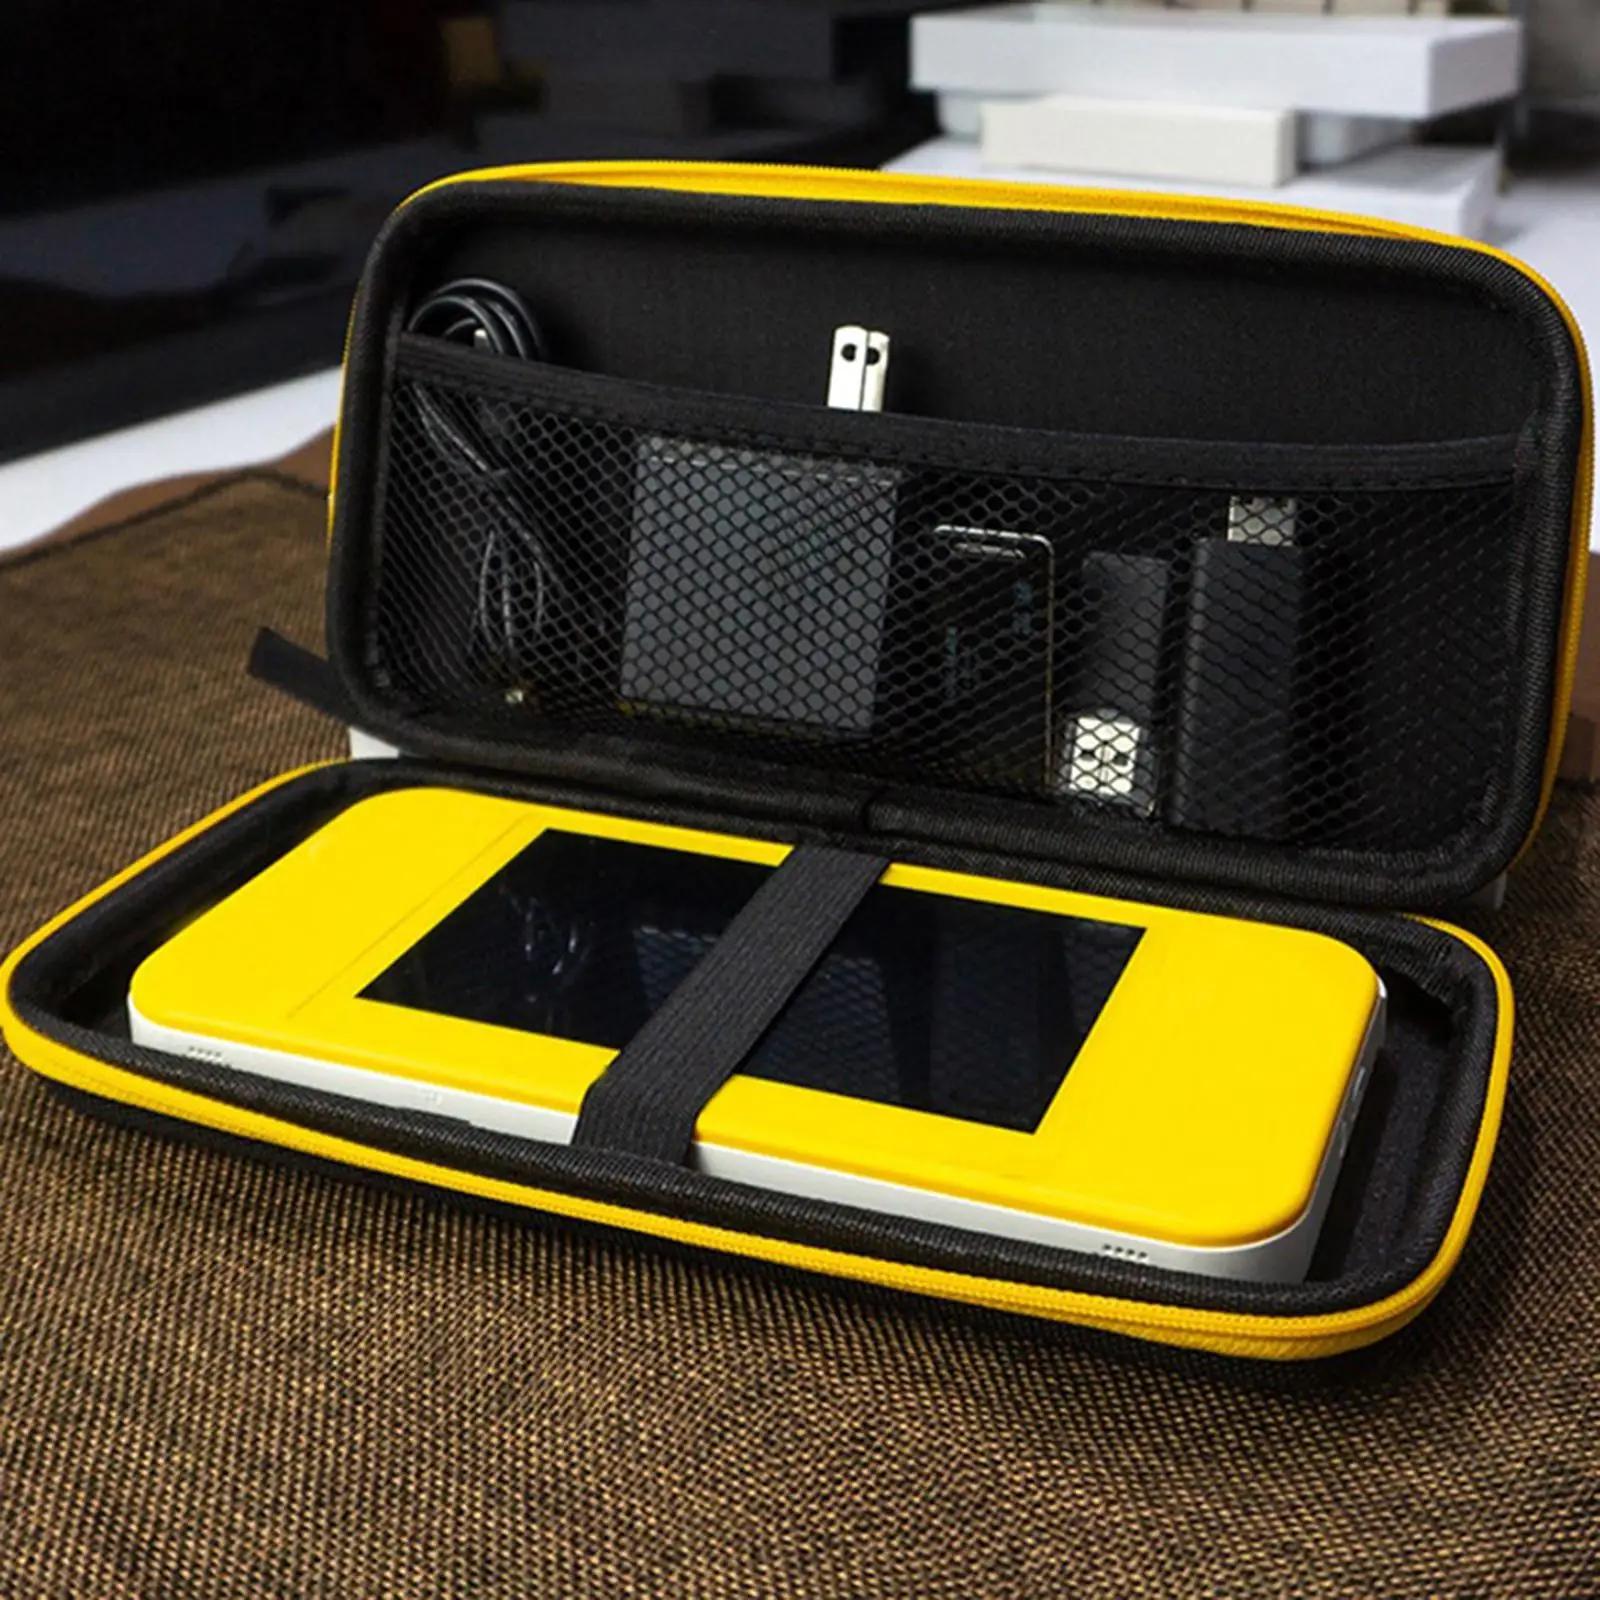 Carrying Case Suitcase Bag Hard Protective Impact Resistant Black Accessory Portable Hard Shell Pouch for Pocket 3 Game Console